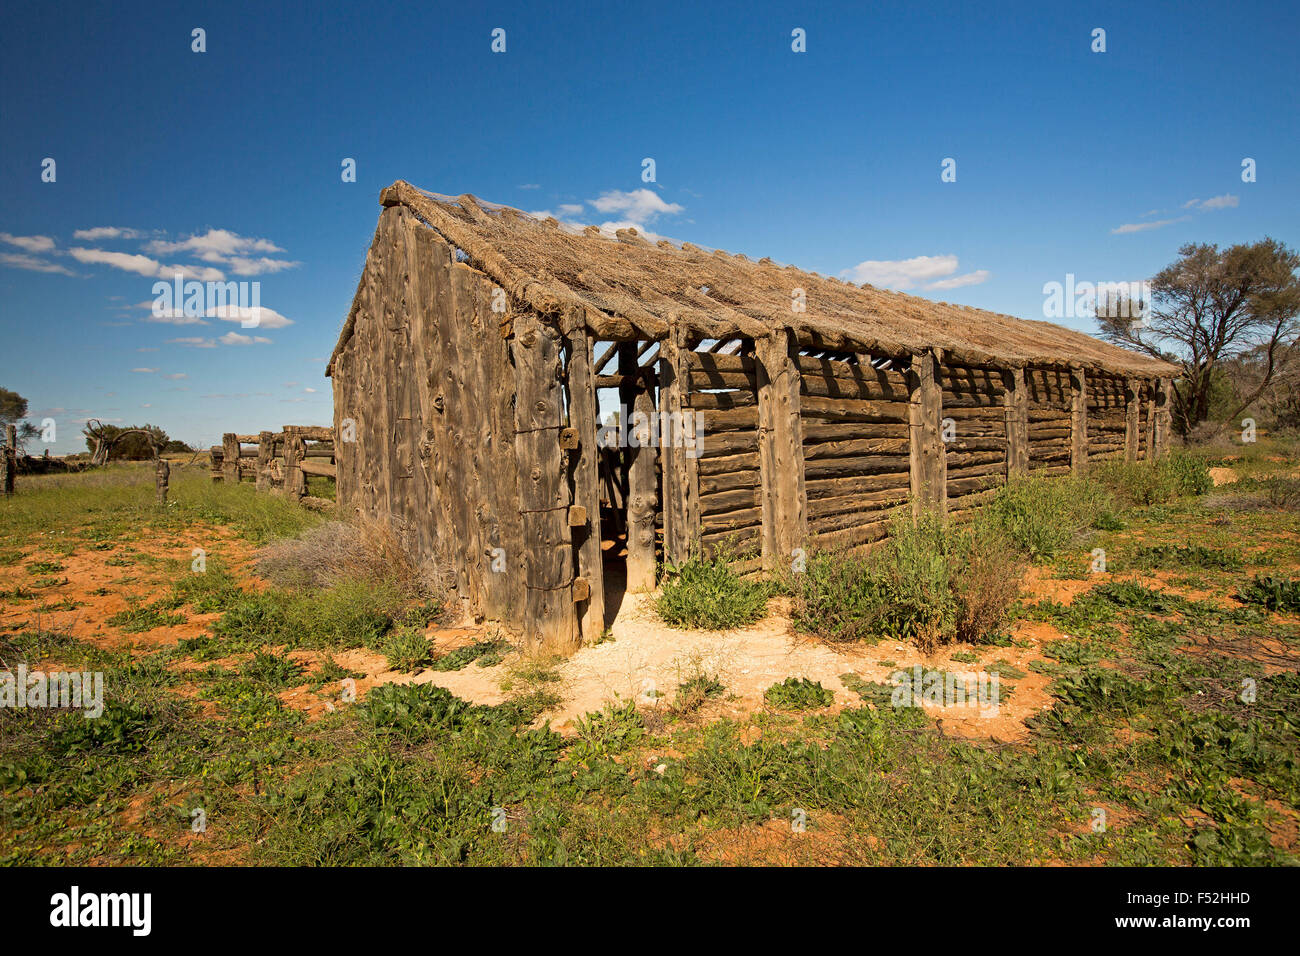 Old stables built from native cypress pine, surrounded by green vegetation after rain, at abandoned homestead, outback Australia Stock Photo